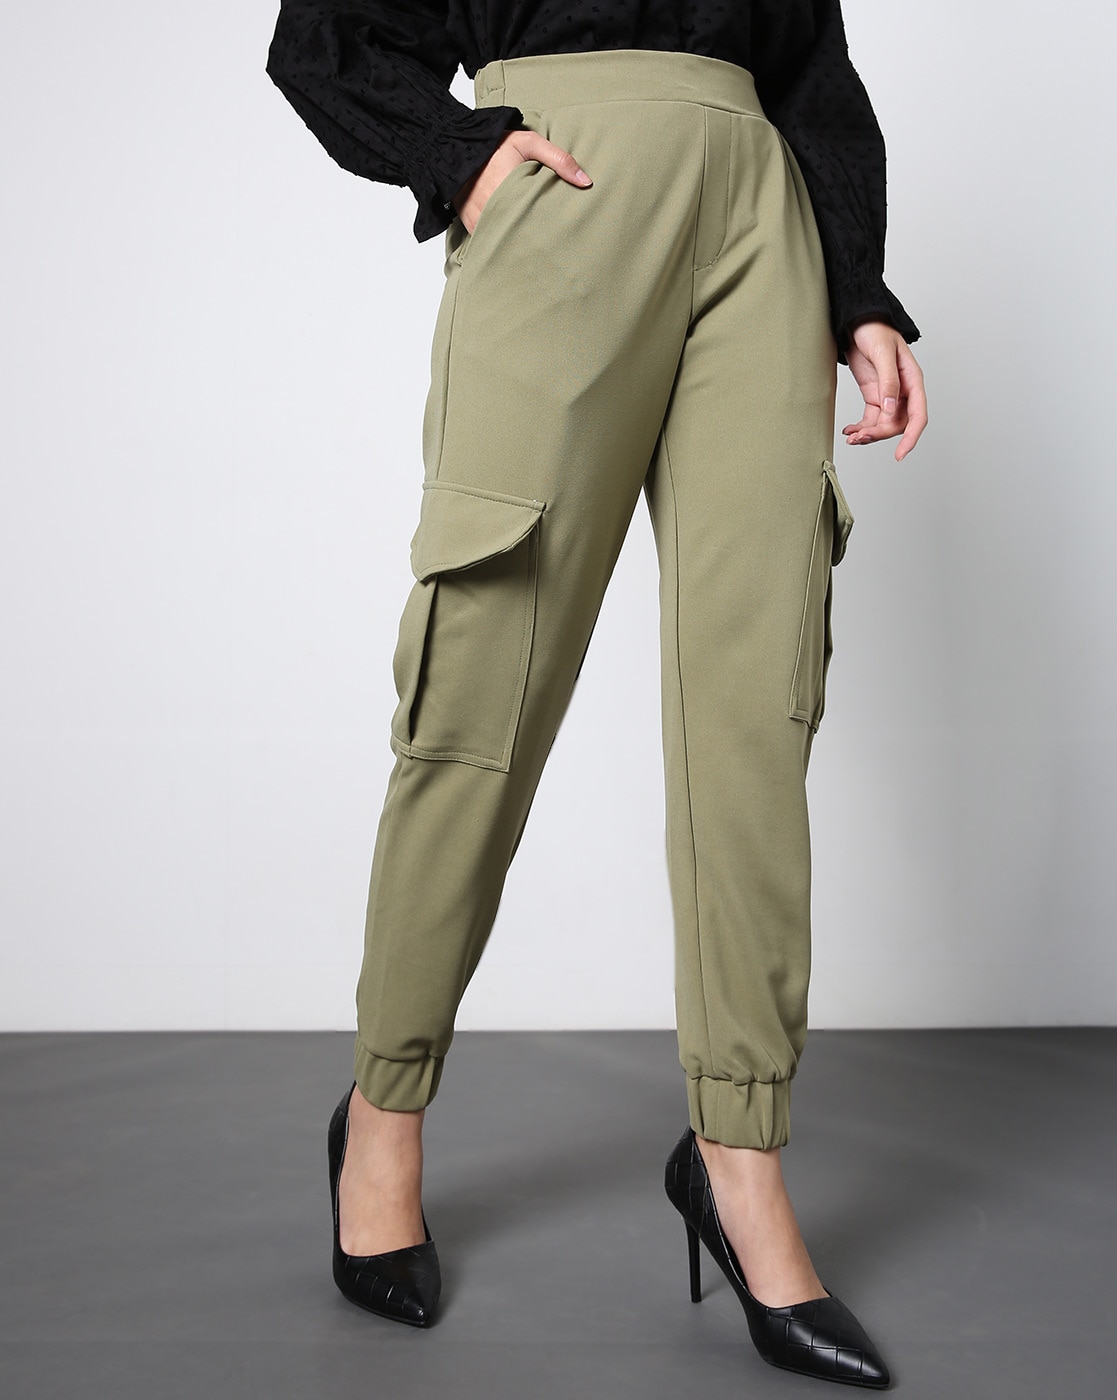 Buy Teal Trousers  Pants for Women by Outryt Online  Ajiocom